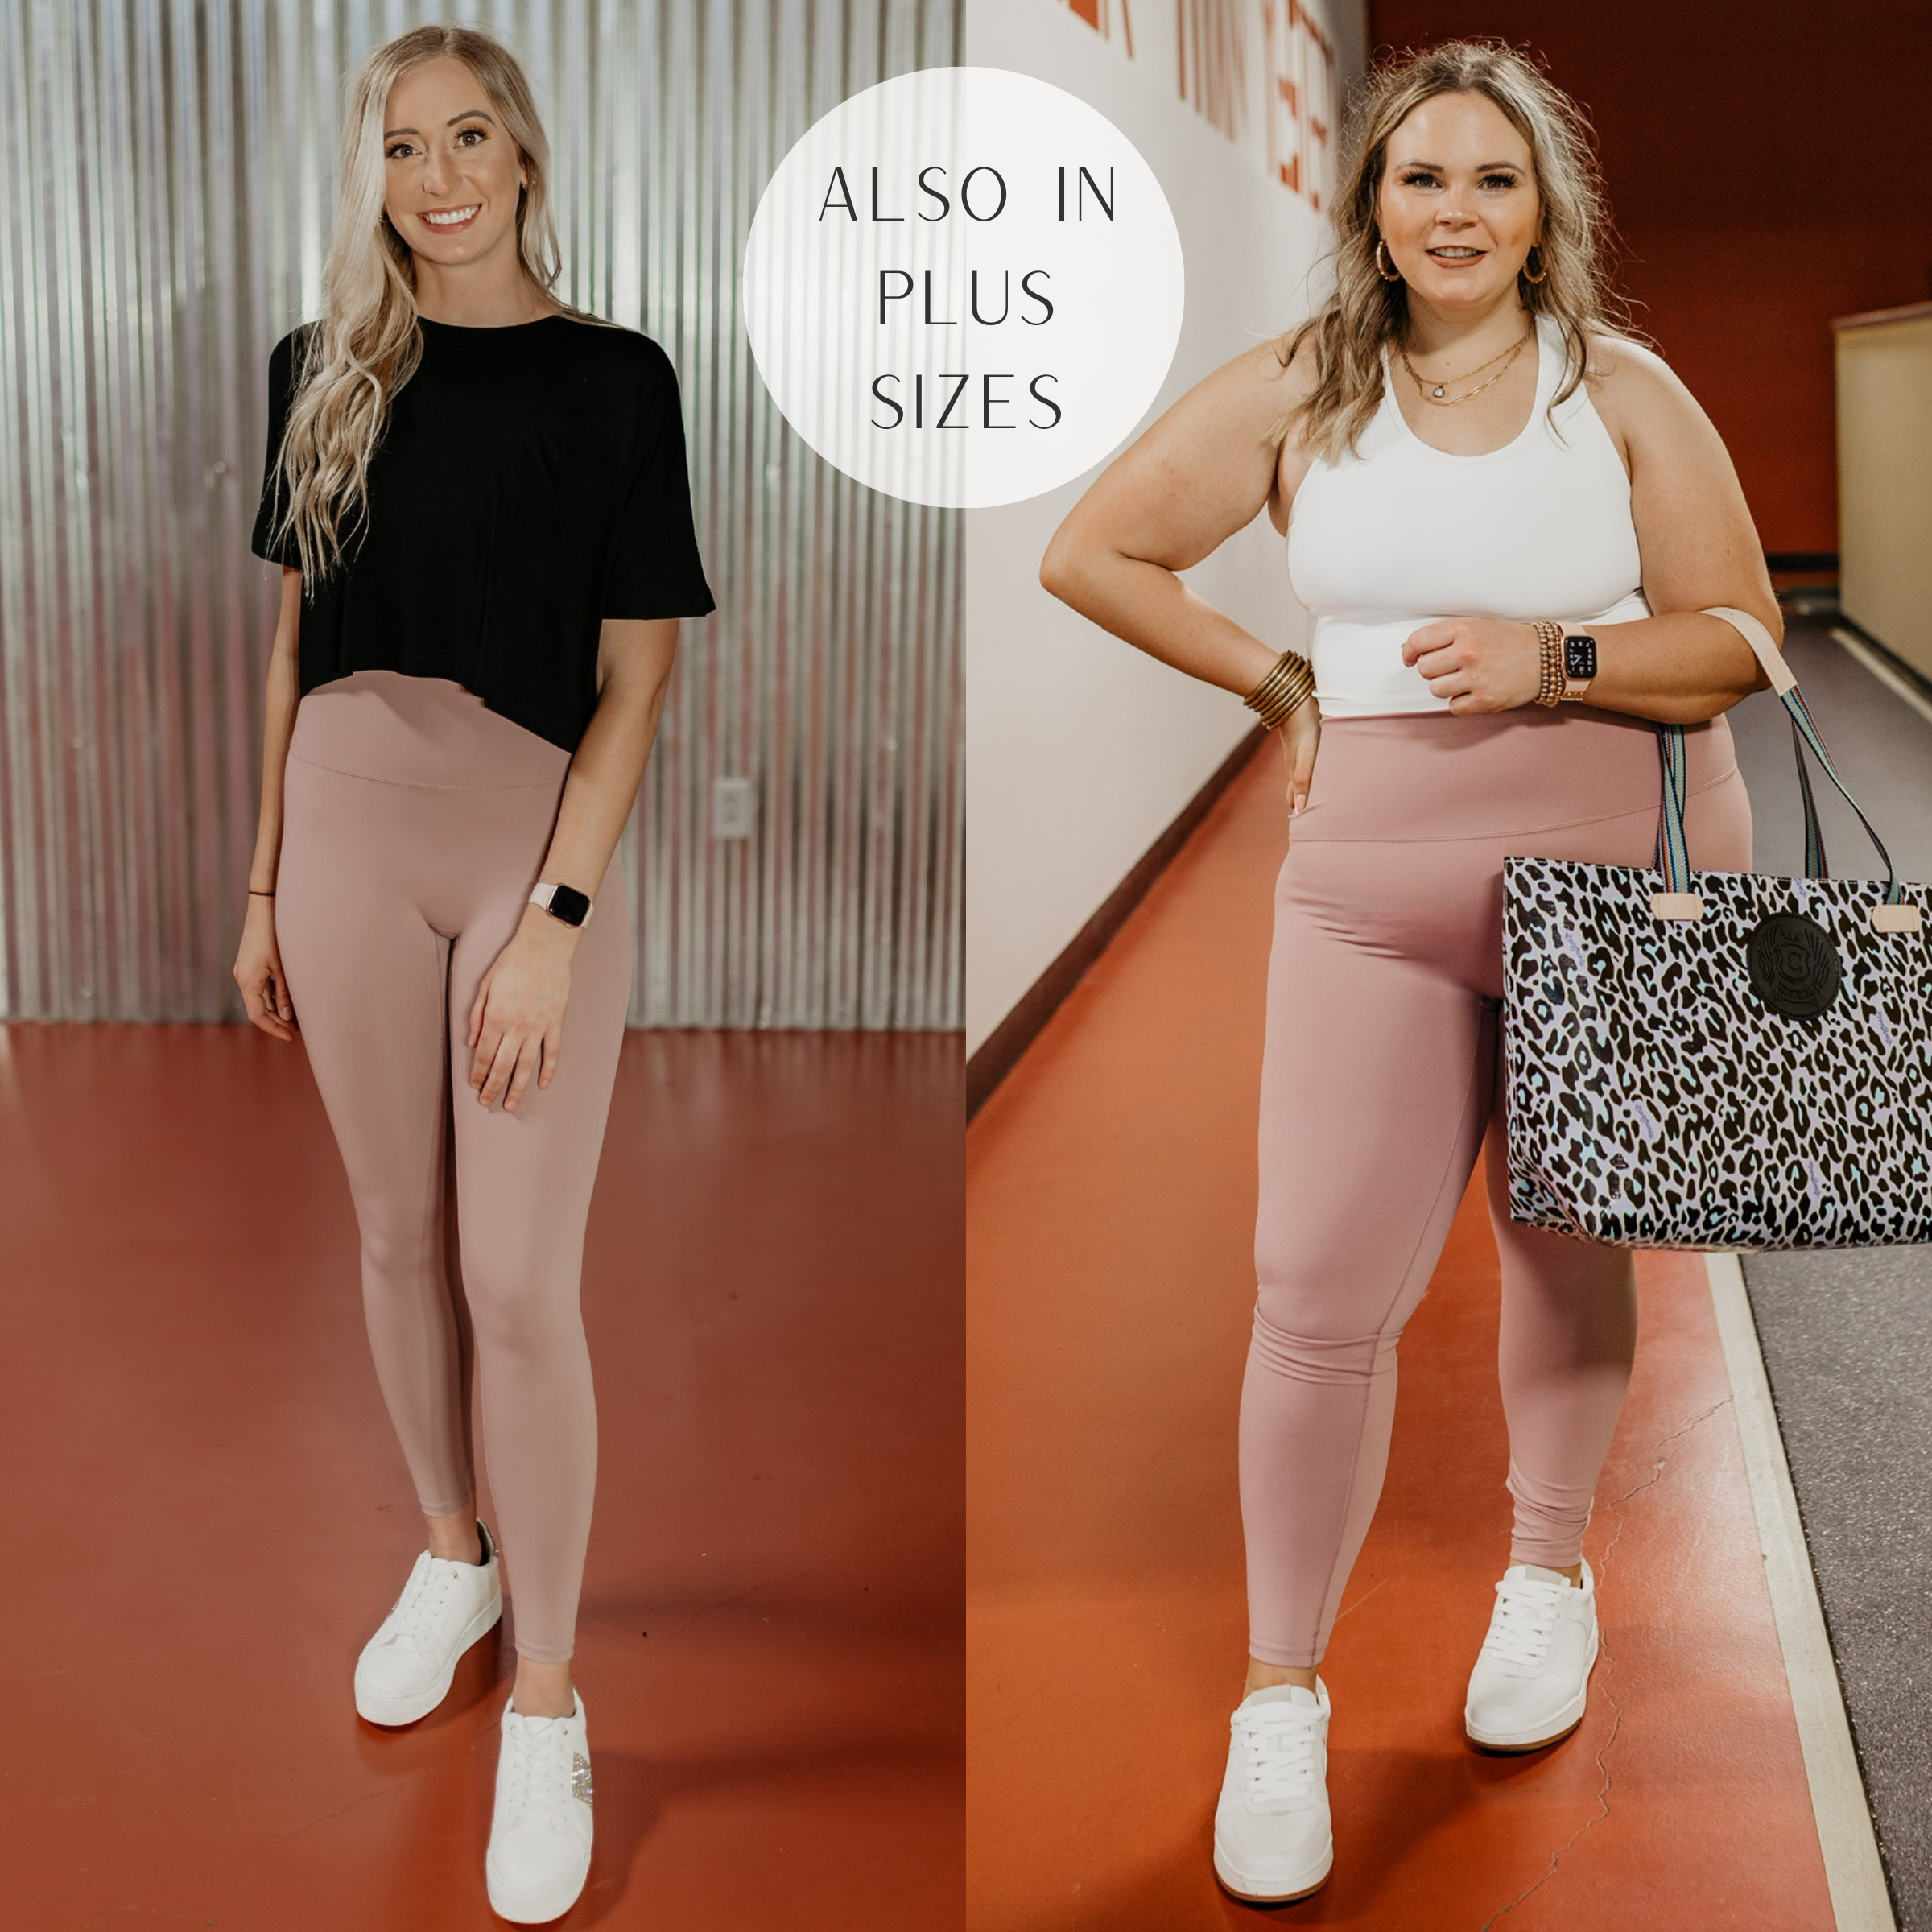 Models are wearing a pair of dusty pink leggings. Size small model has it paired with white sneakers and a black crop top. Size large model has it paired with a white top, leopard print bag, and white sneakers.